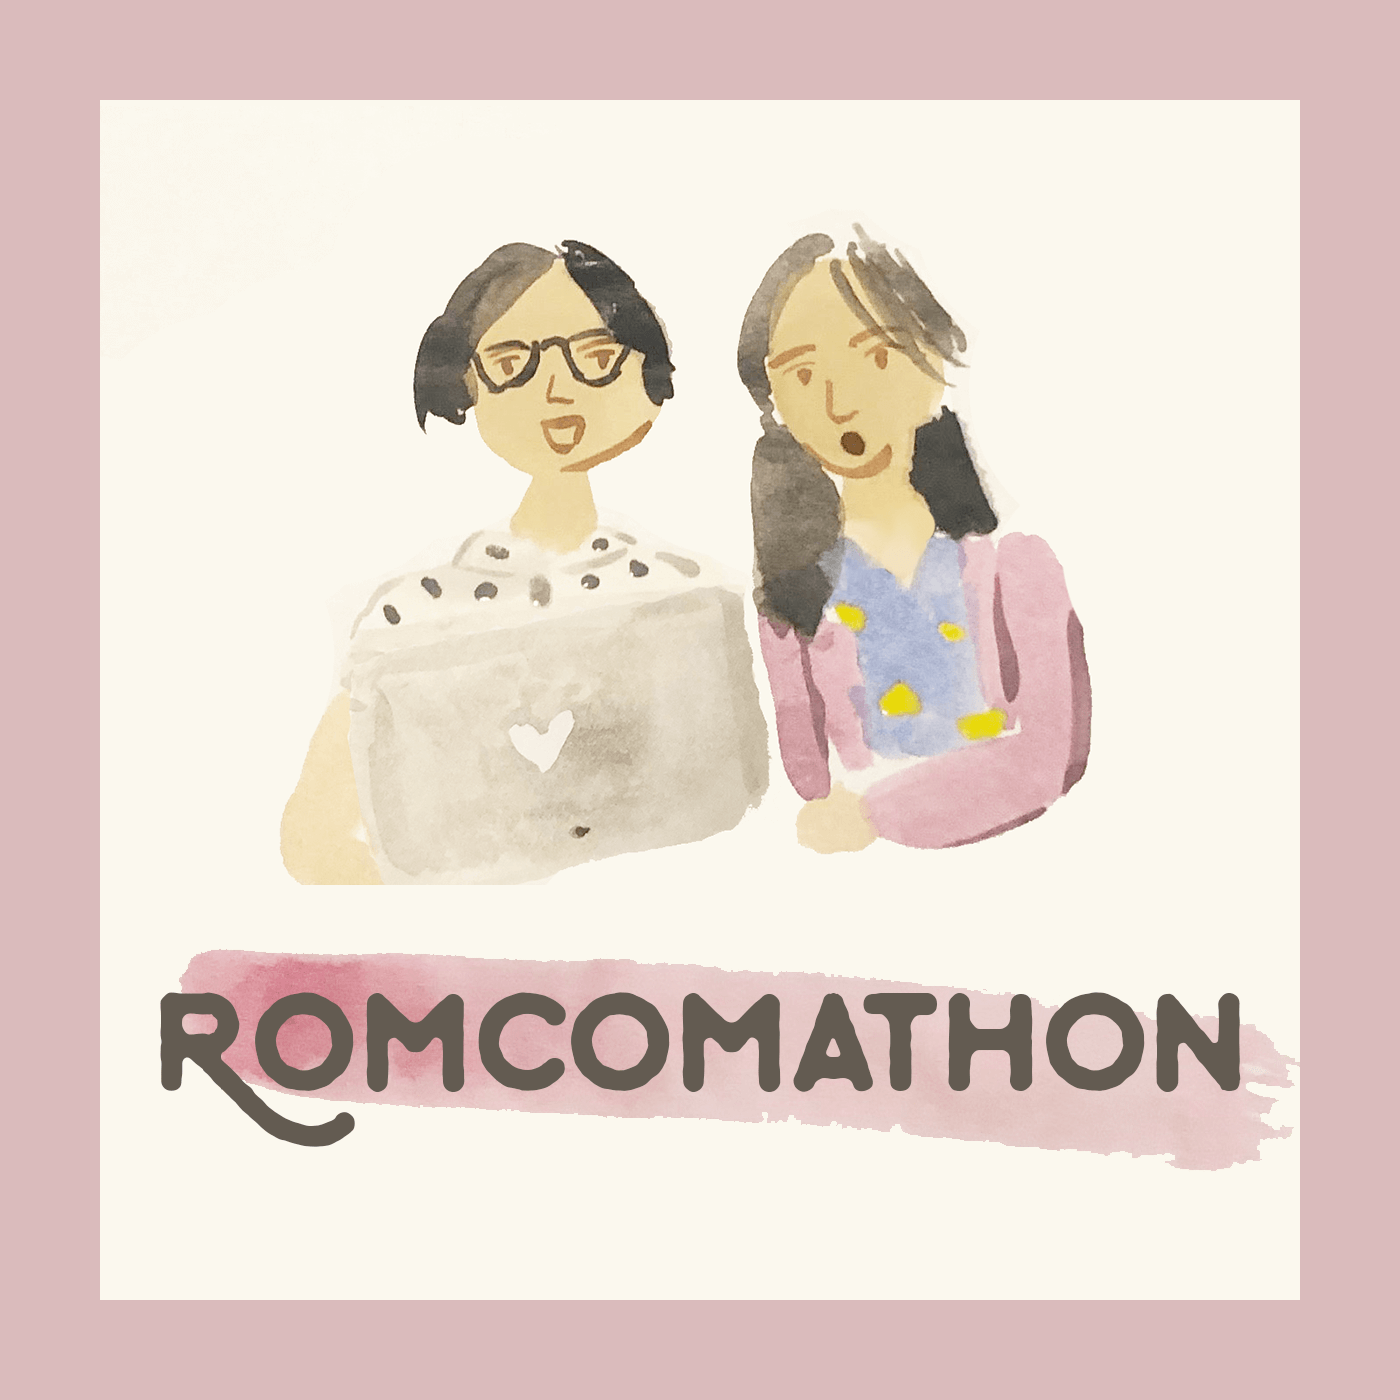 Episode 9 Four Weddings And A Funeral Romcomathon Podcast